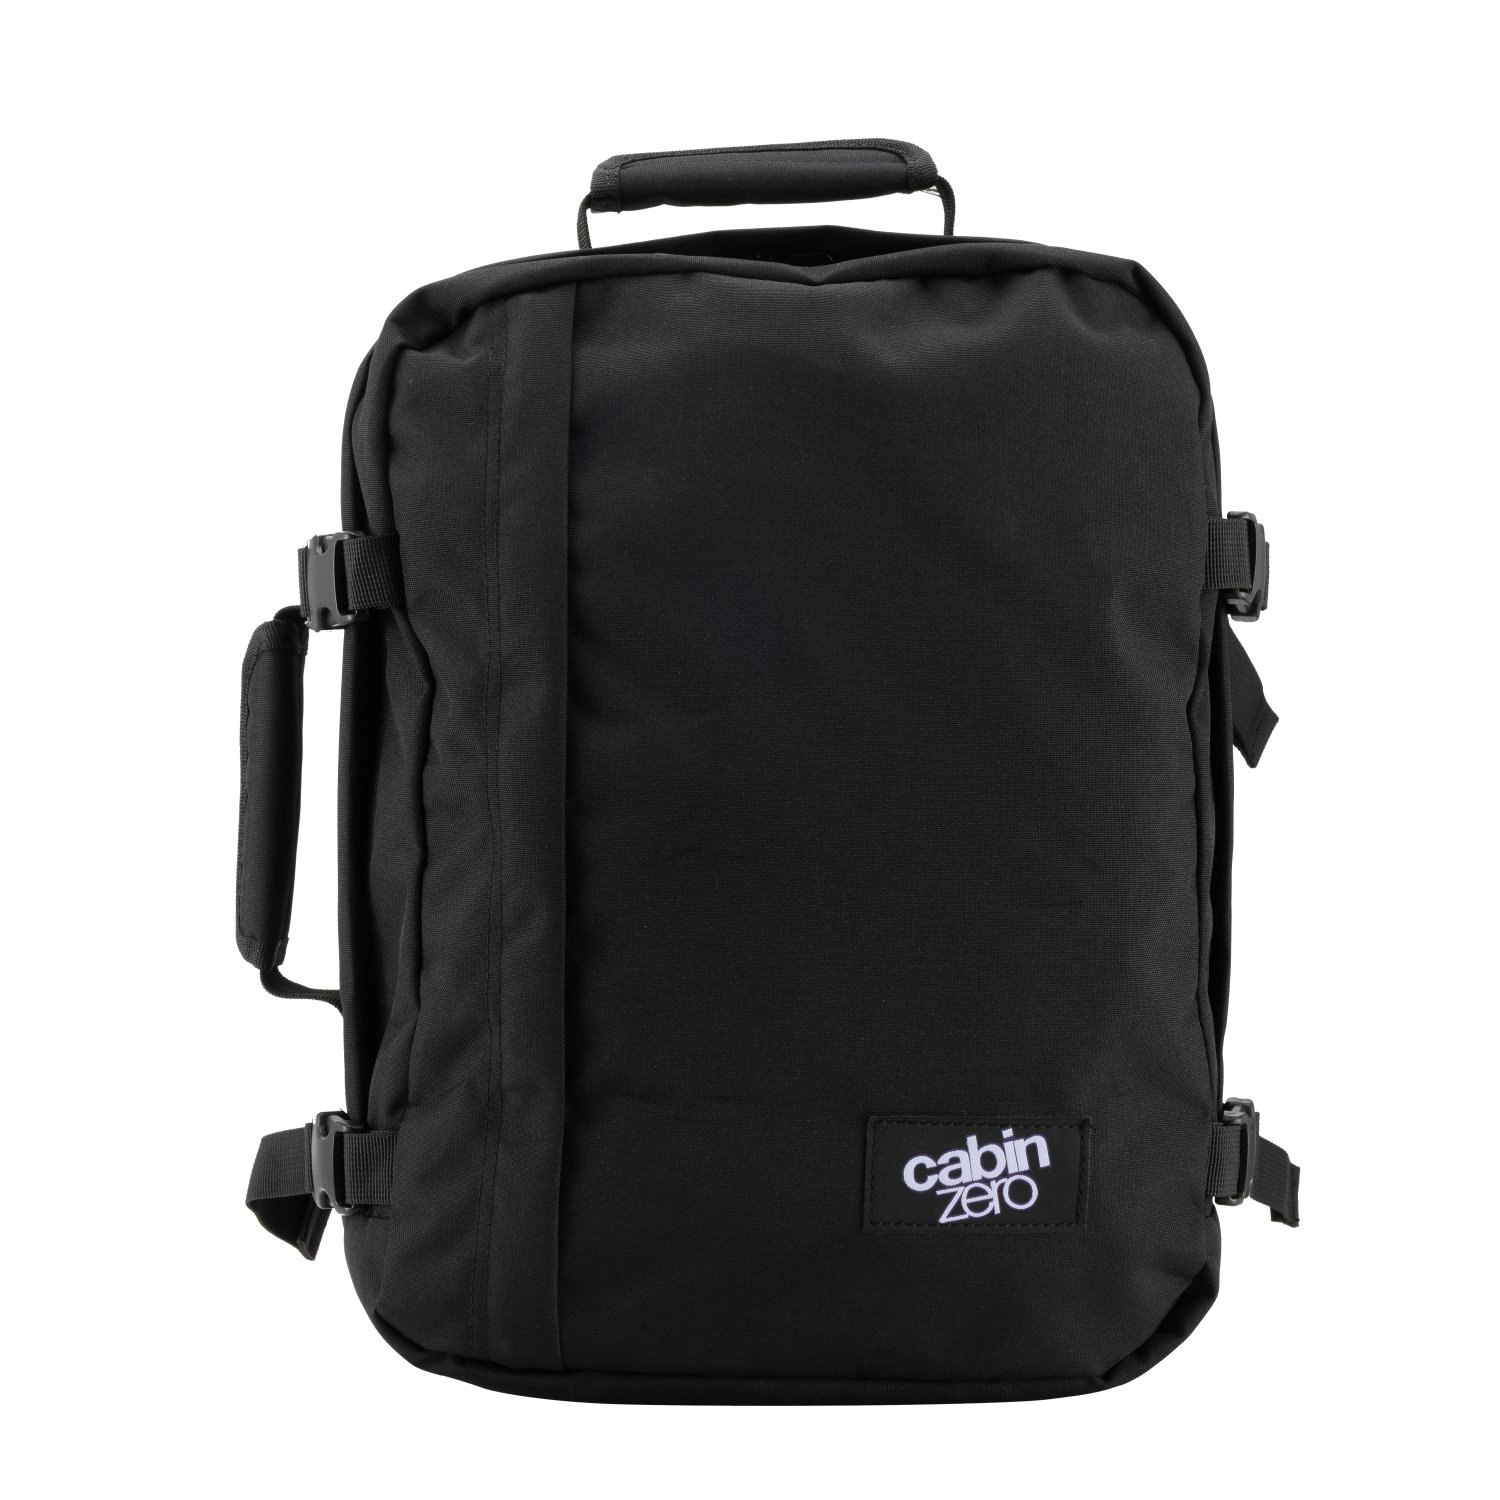 Travel Light with the Cabin Zero 3L Carry On Backpack